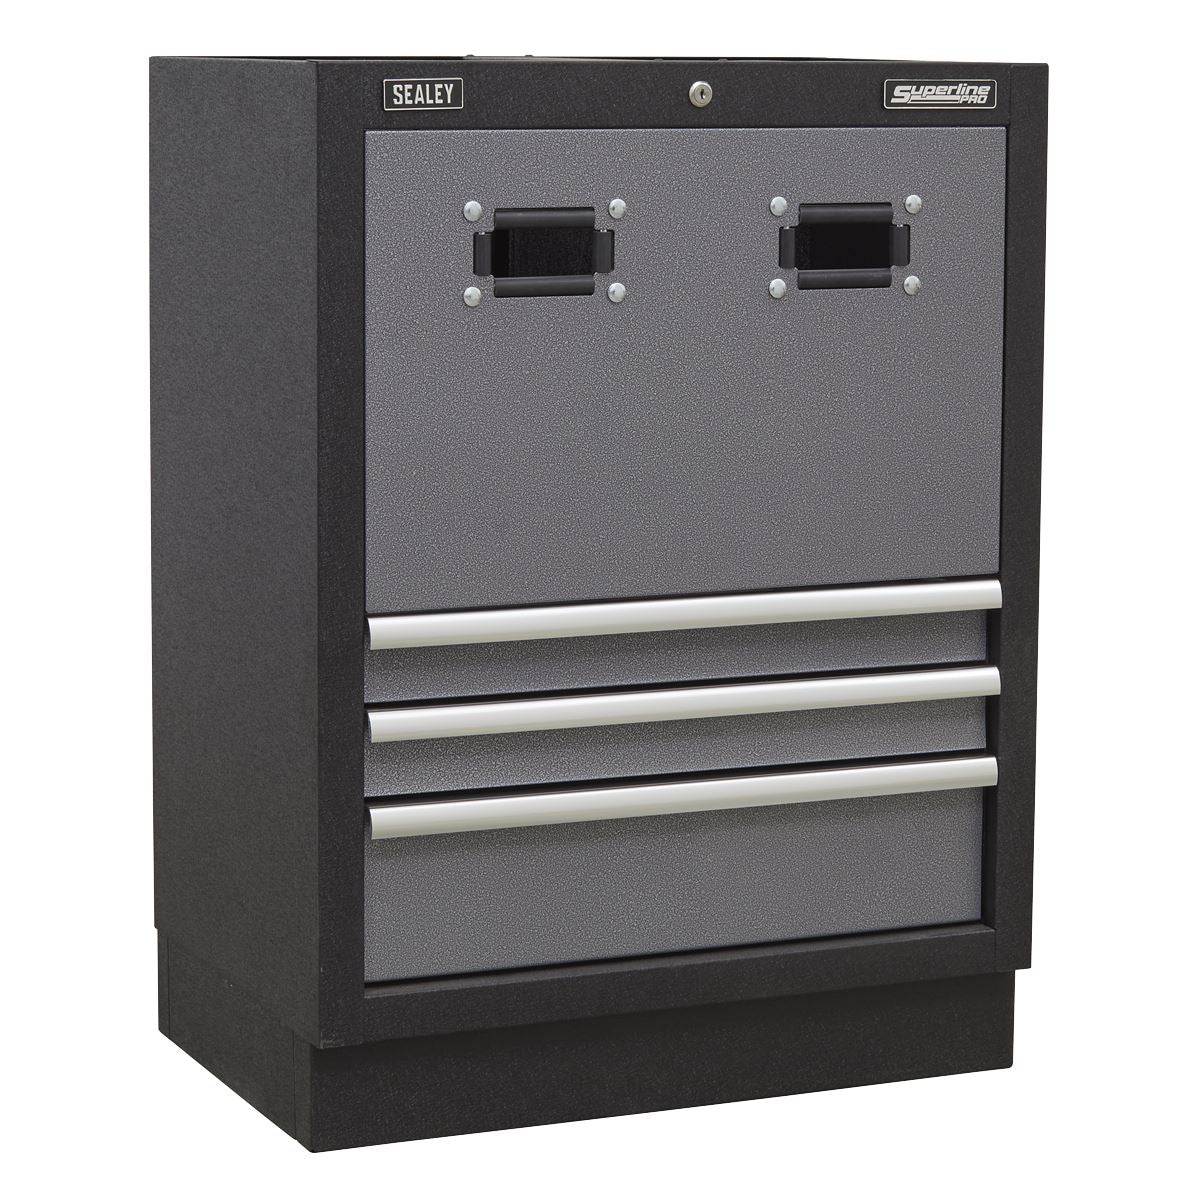 Sealey Modular Storage System Combo - Stainless Steel Worktop APMSSTACK14SS